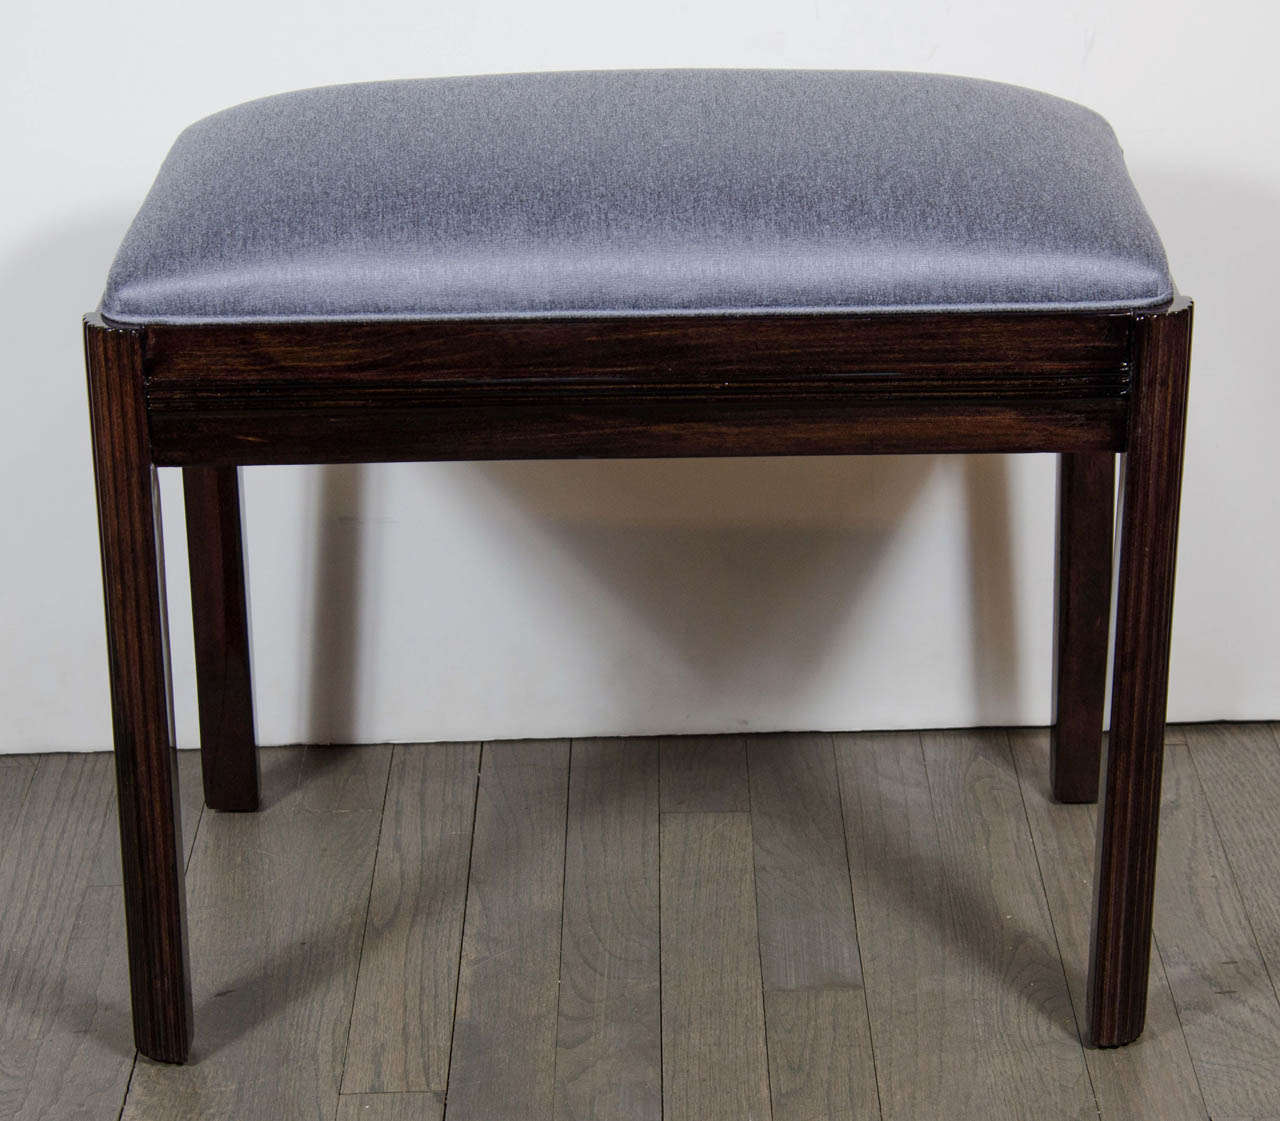 This bench/ stool features a fluted leg detailing and is made of ebonized walnut and newly upholstered in a silver /blue sharkskin upholstery. Great as a bench / stool for a vanity or a hallway. This piece has been mint restored.